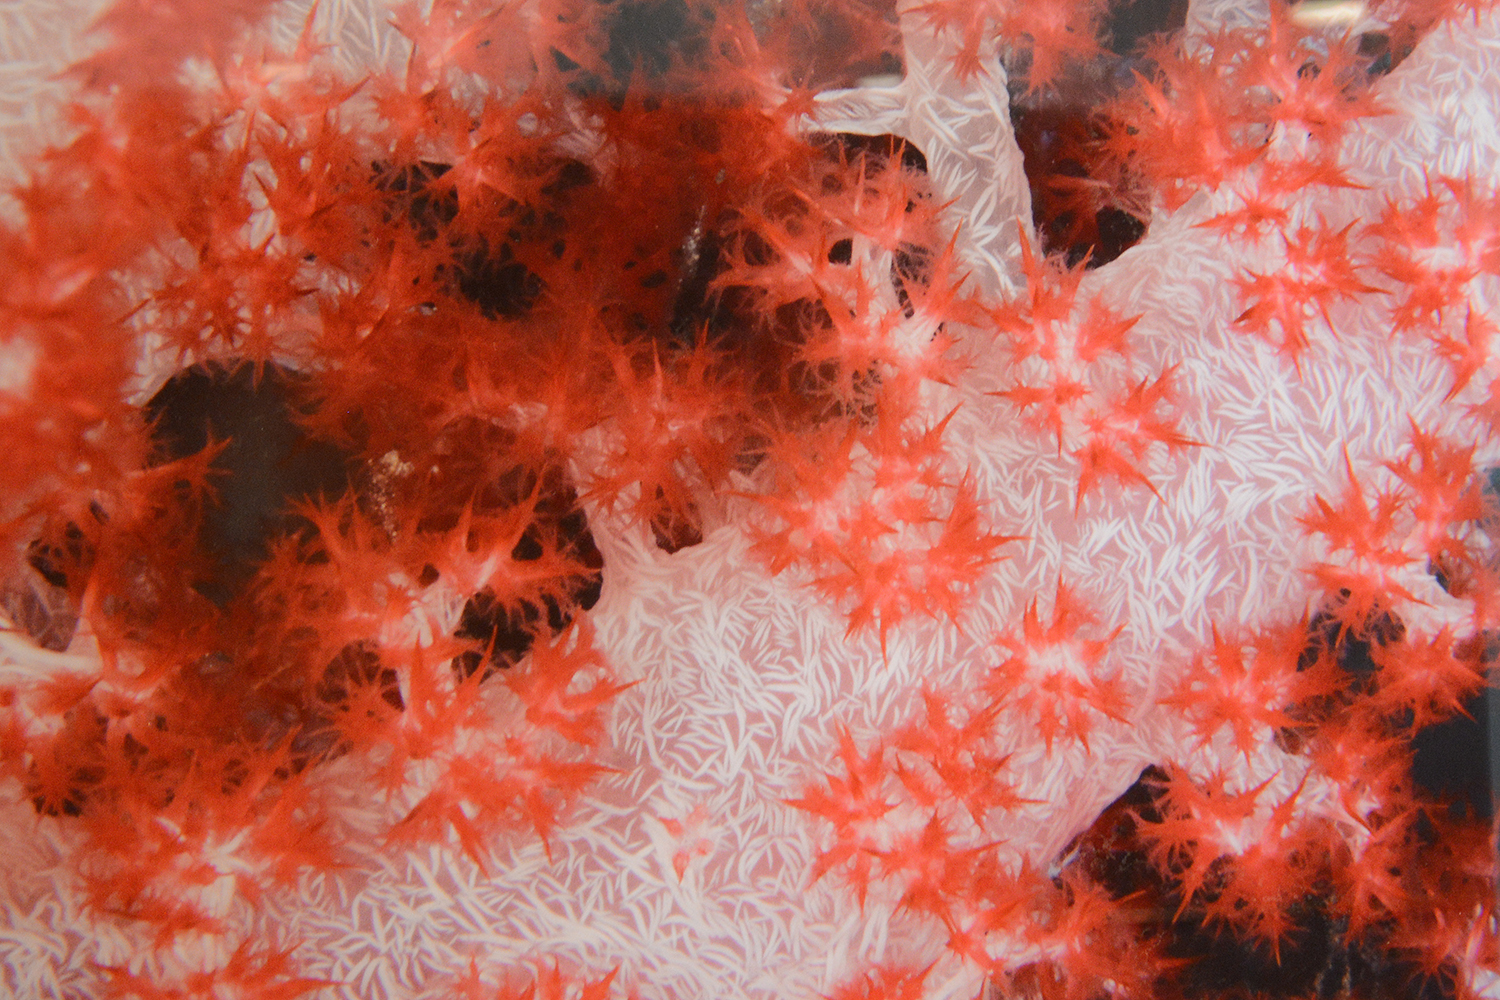 Pictured is "Red and White Soft Coral" photographed in 2013. 